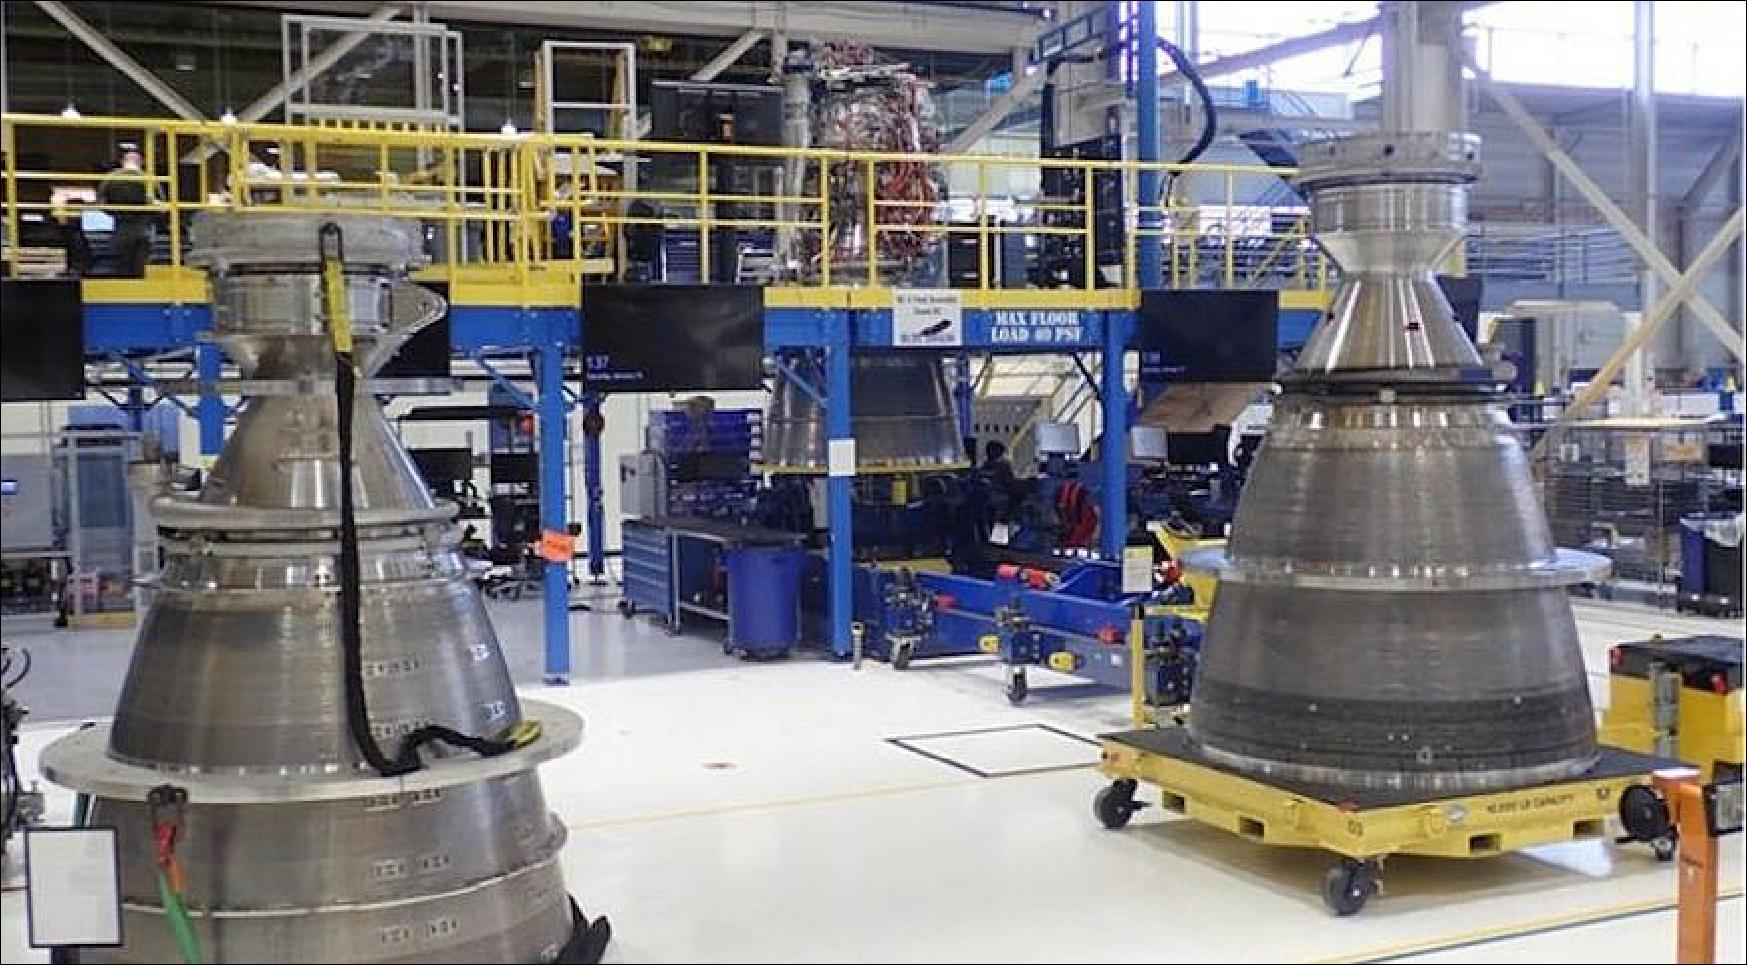 Figure 2: Blue Origin’s BE-4 engines for ULA’s Vulcan launch vehicle sit at the build stand (image credit: @ToryBruno)